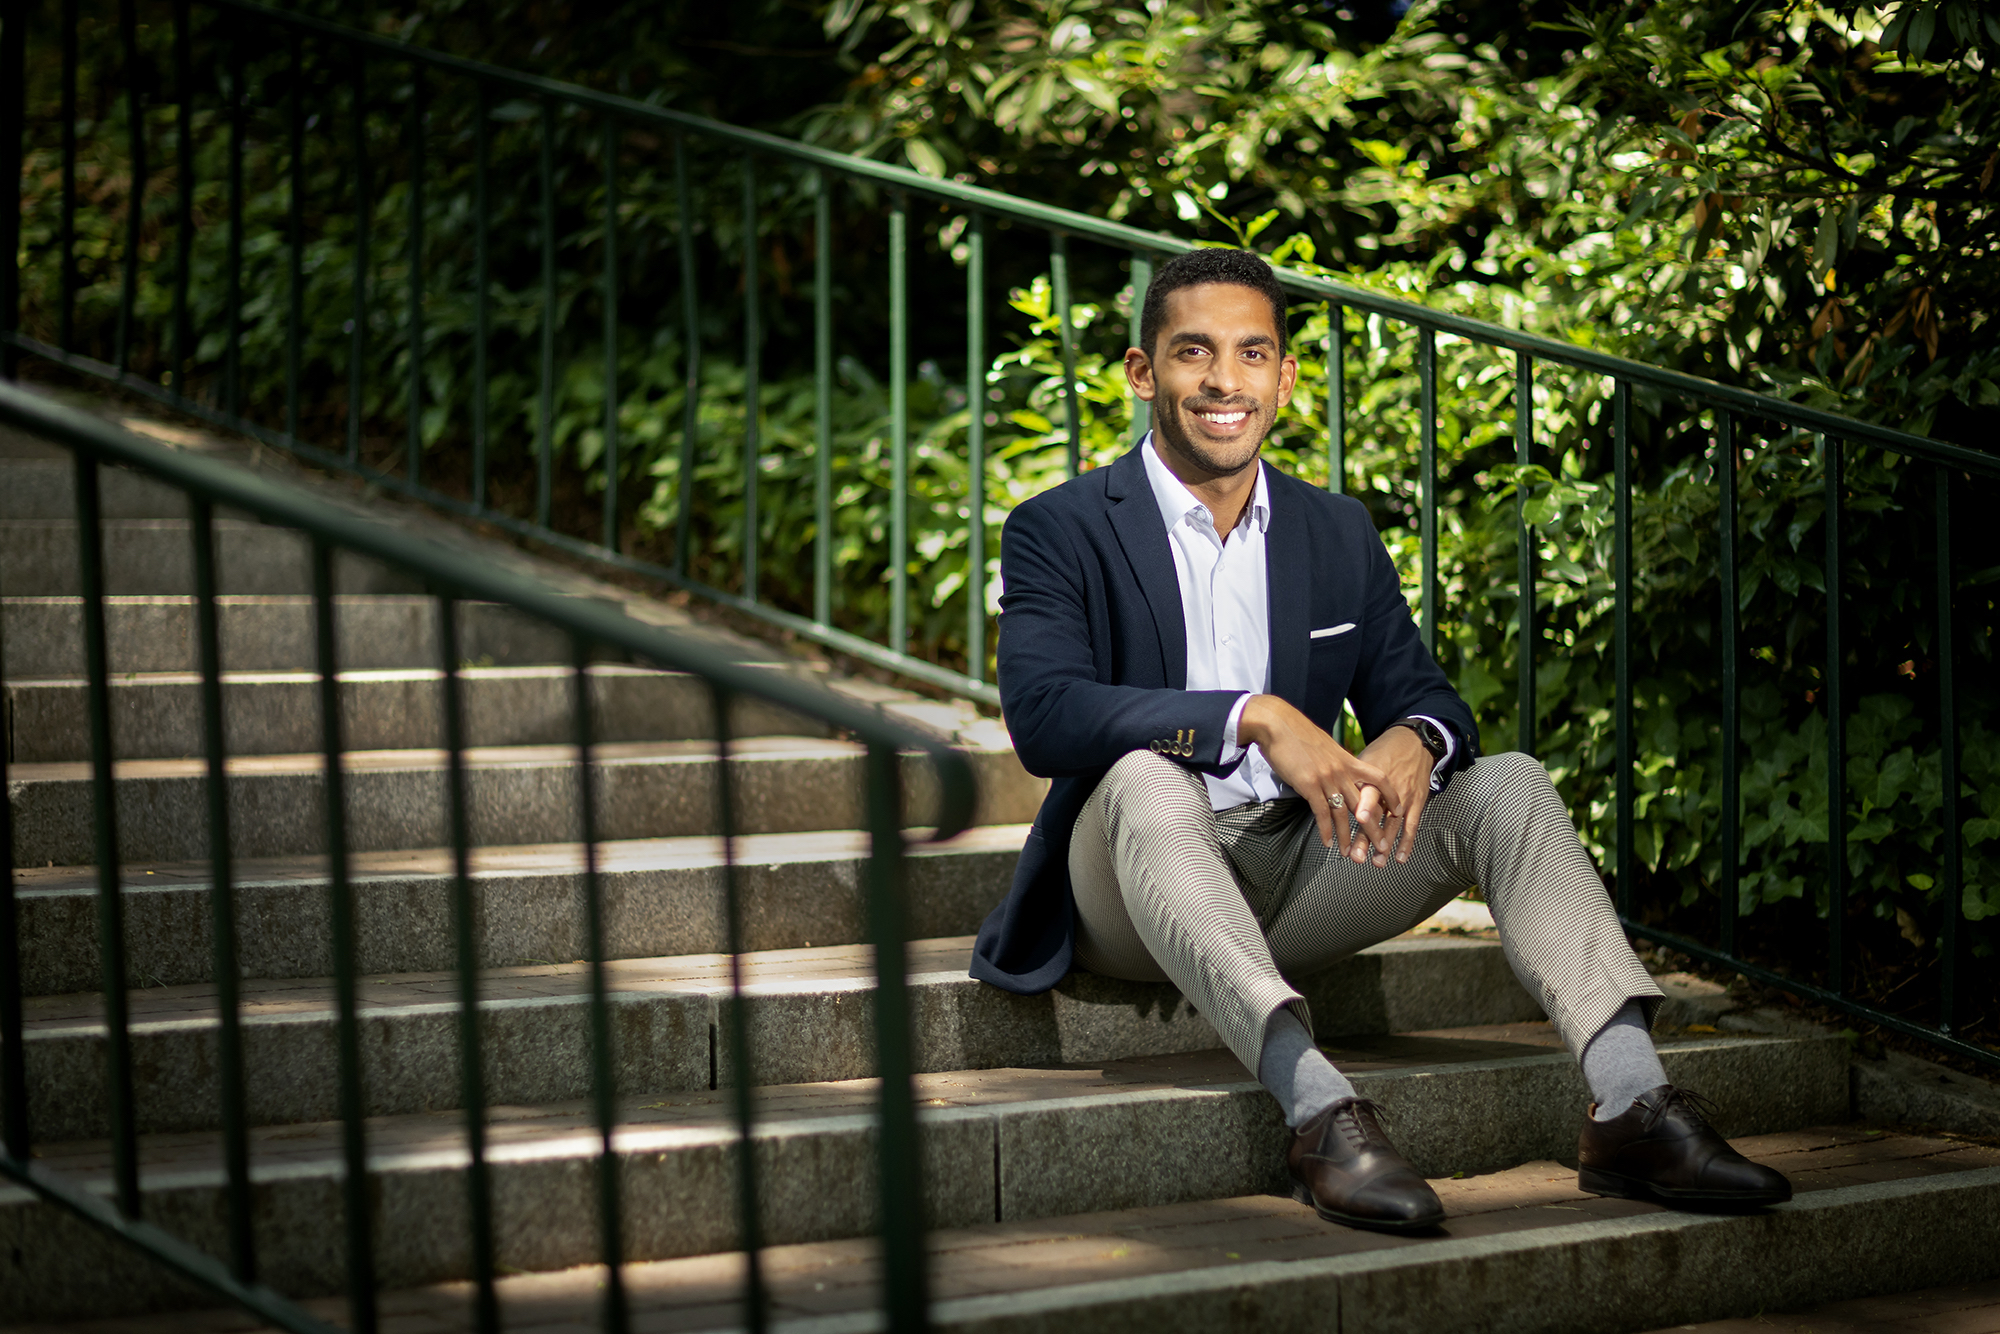 Rich Lizardo sits on concrete stairs in front of greenery on Penn campus.